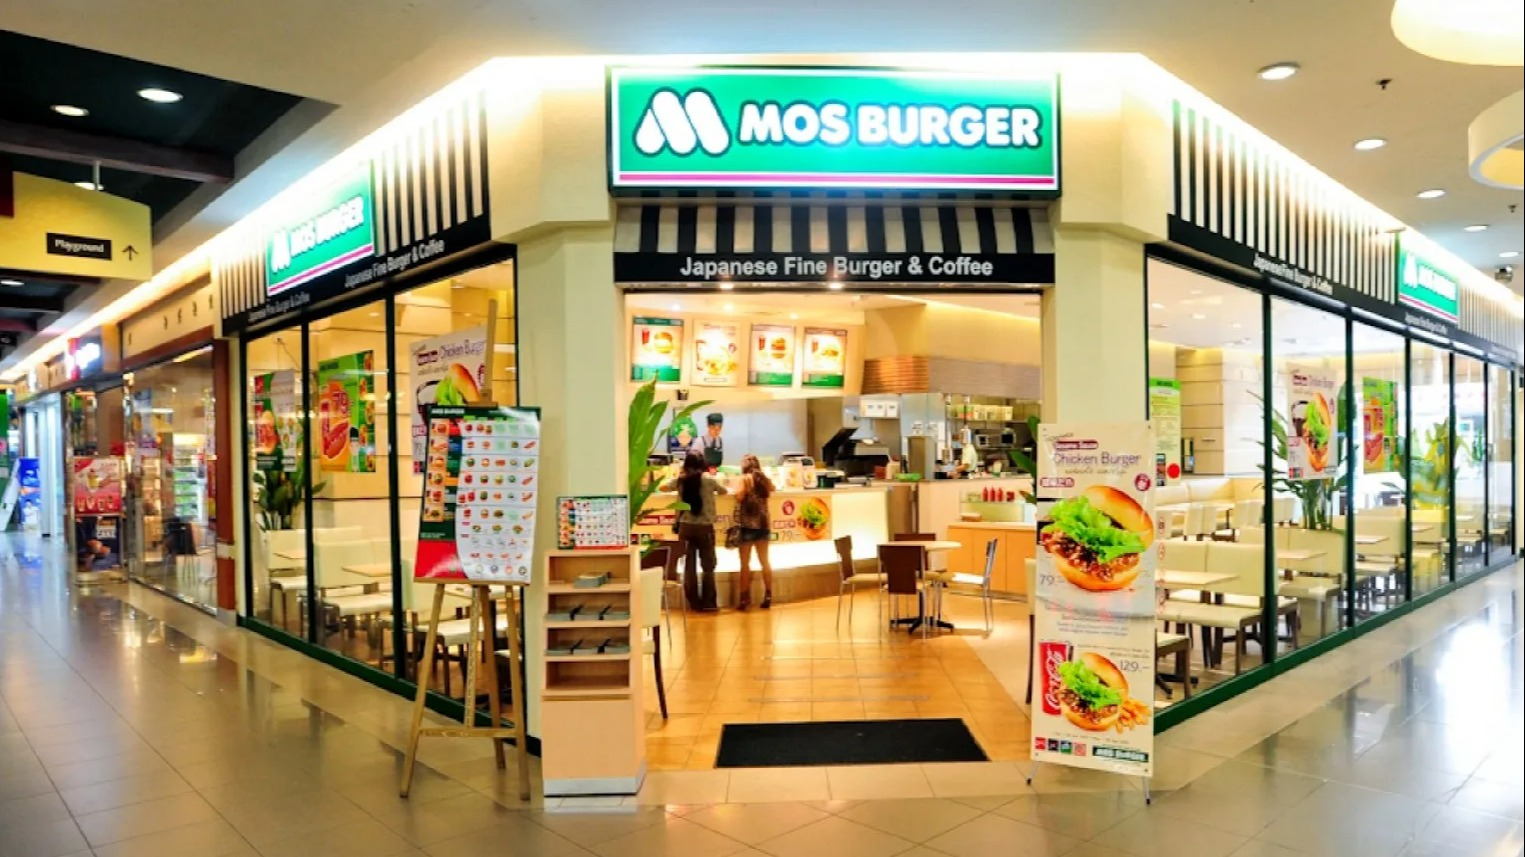 MOS Burger store built in the Philippines